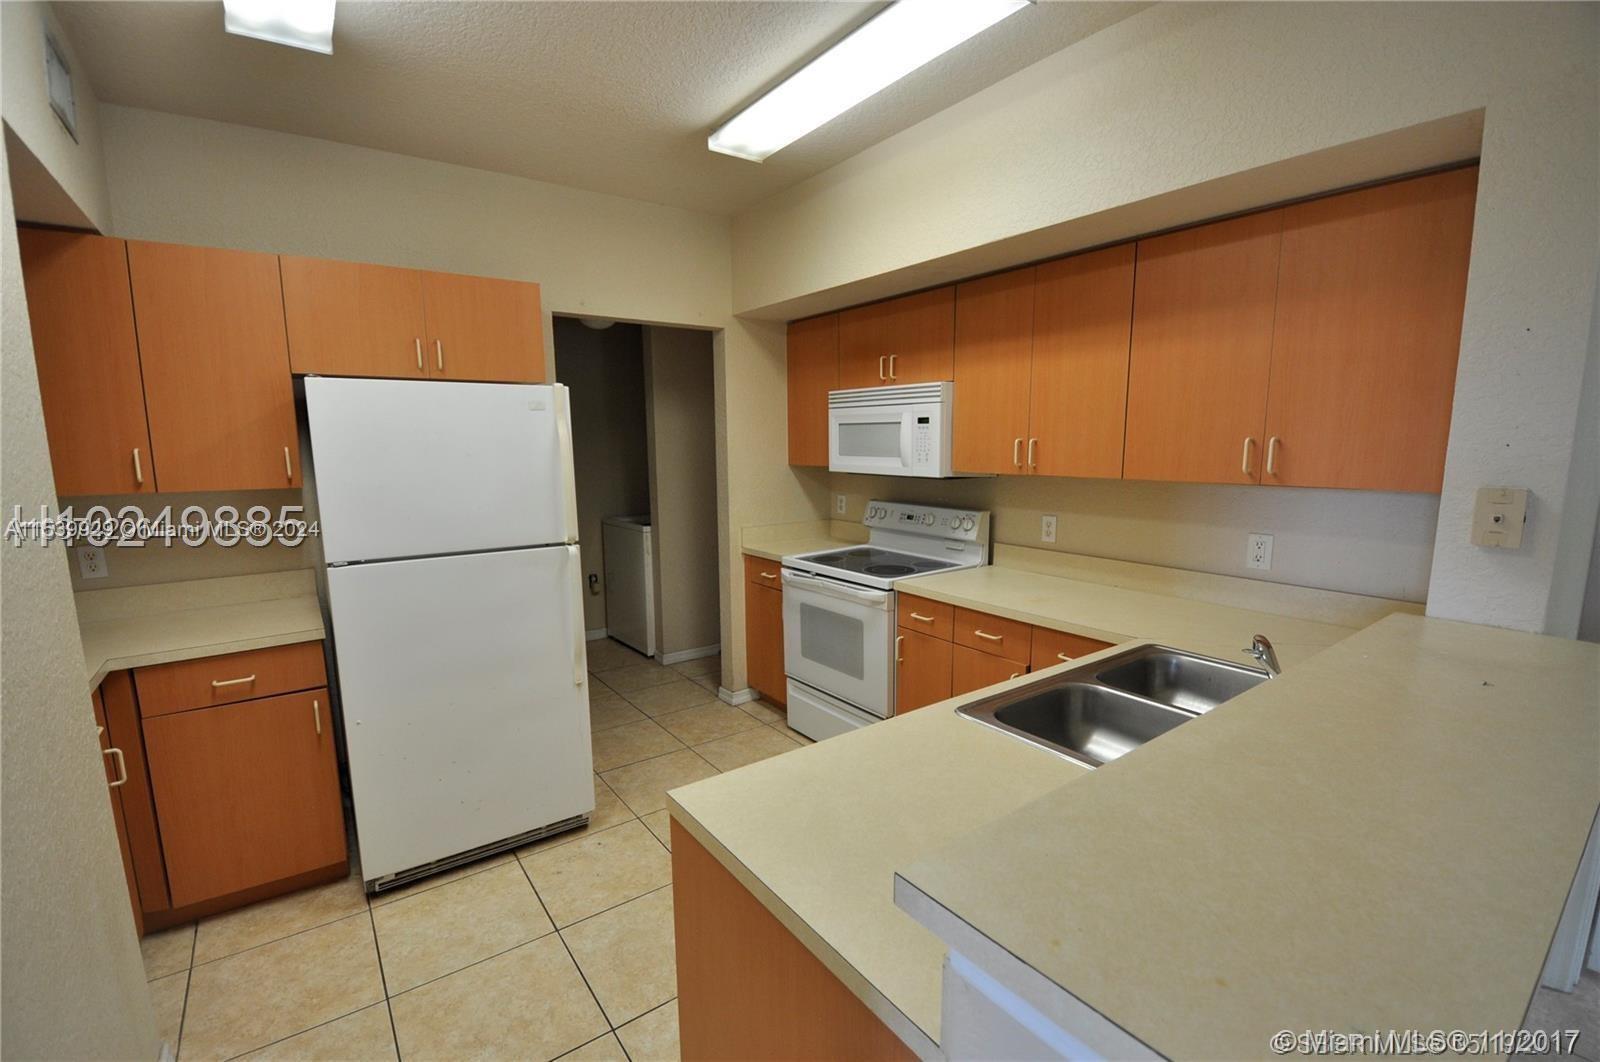 a kitchen with stainless steel appliances a refrigerator sink and stove